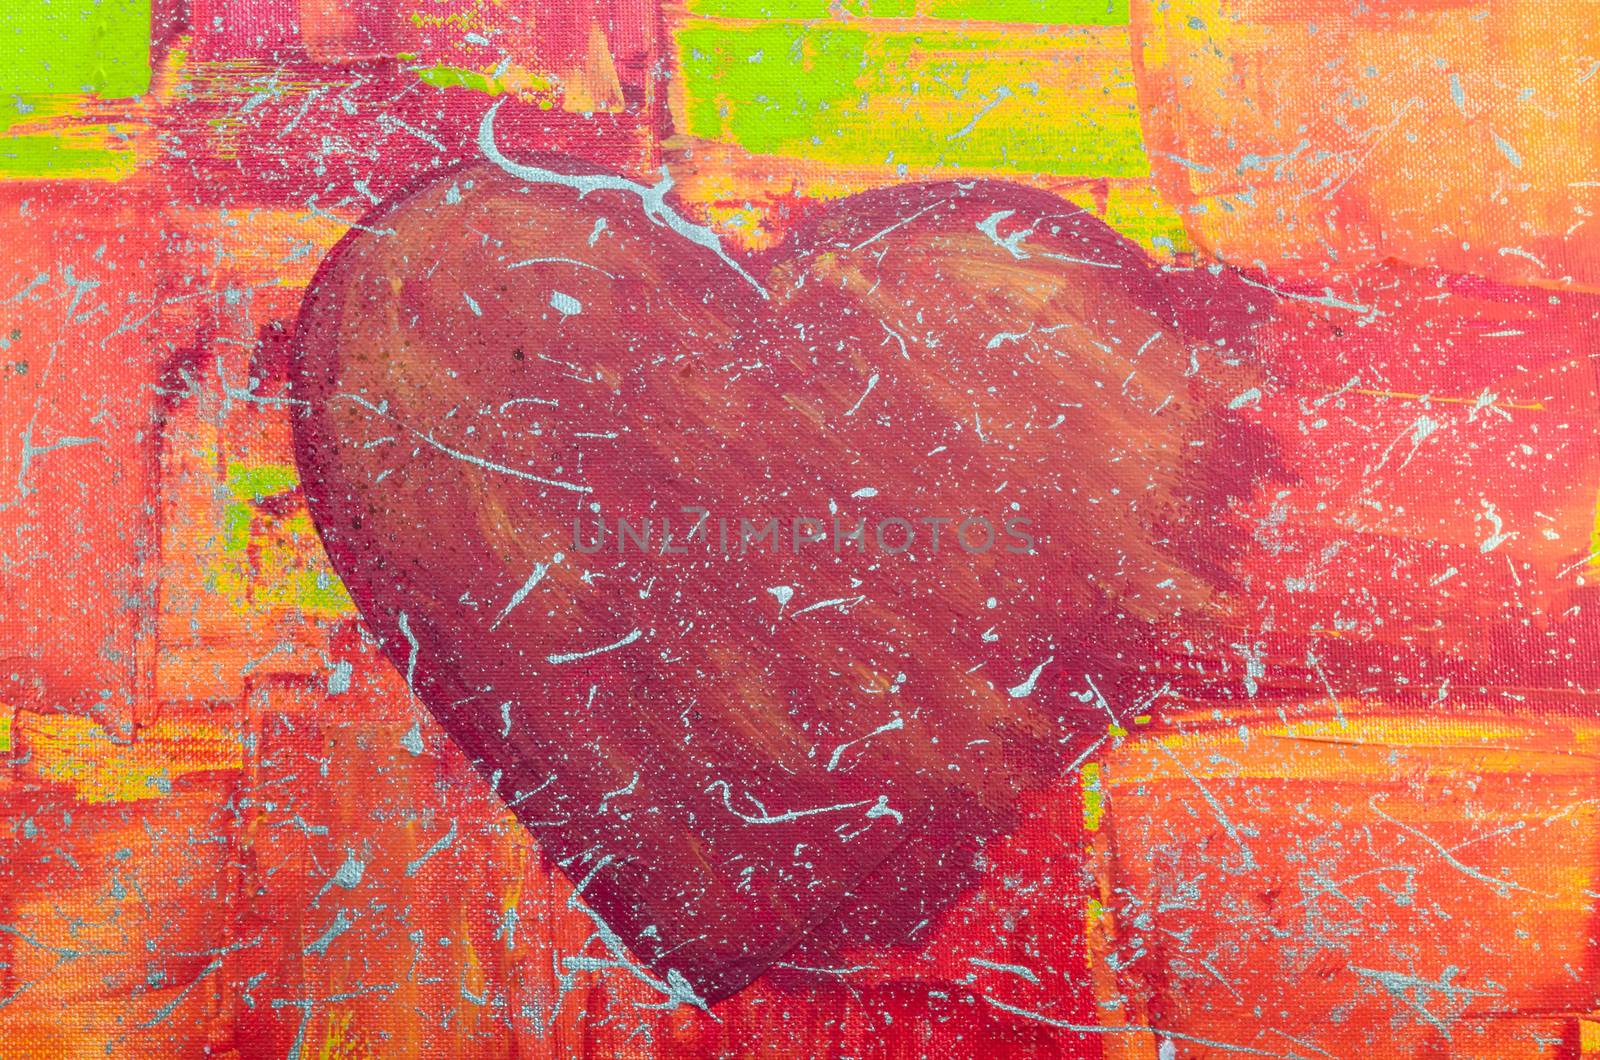 Acrylic painting of our daughter.
Hand Painted big red heart with colorful background.